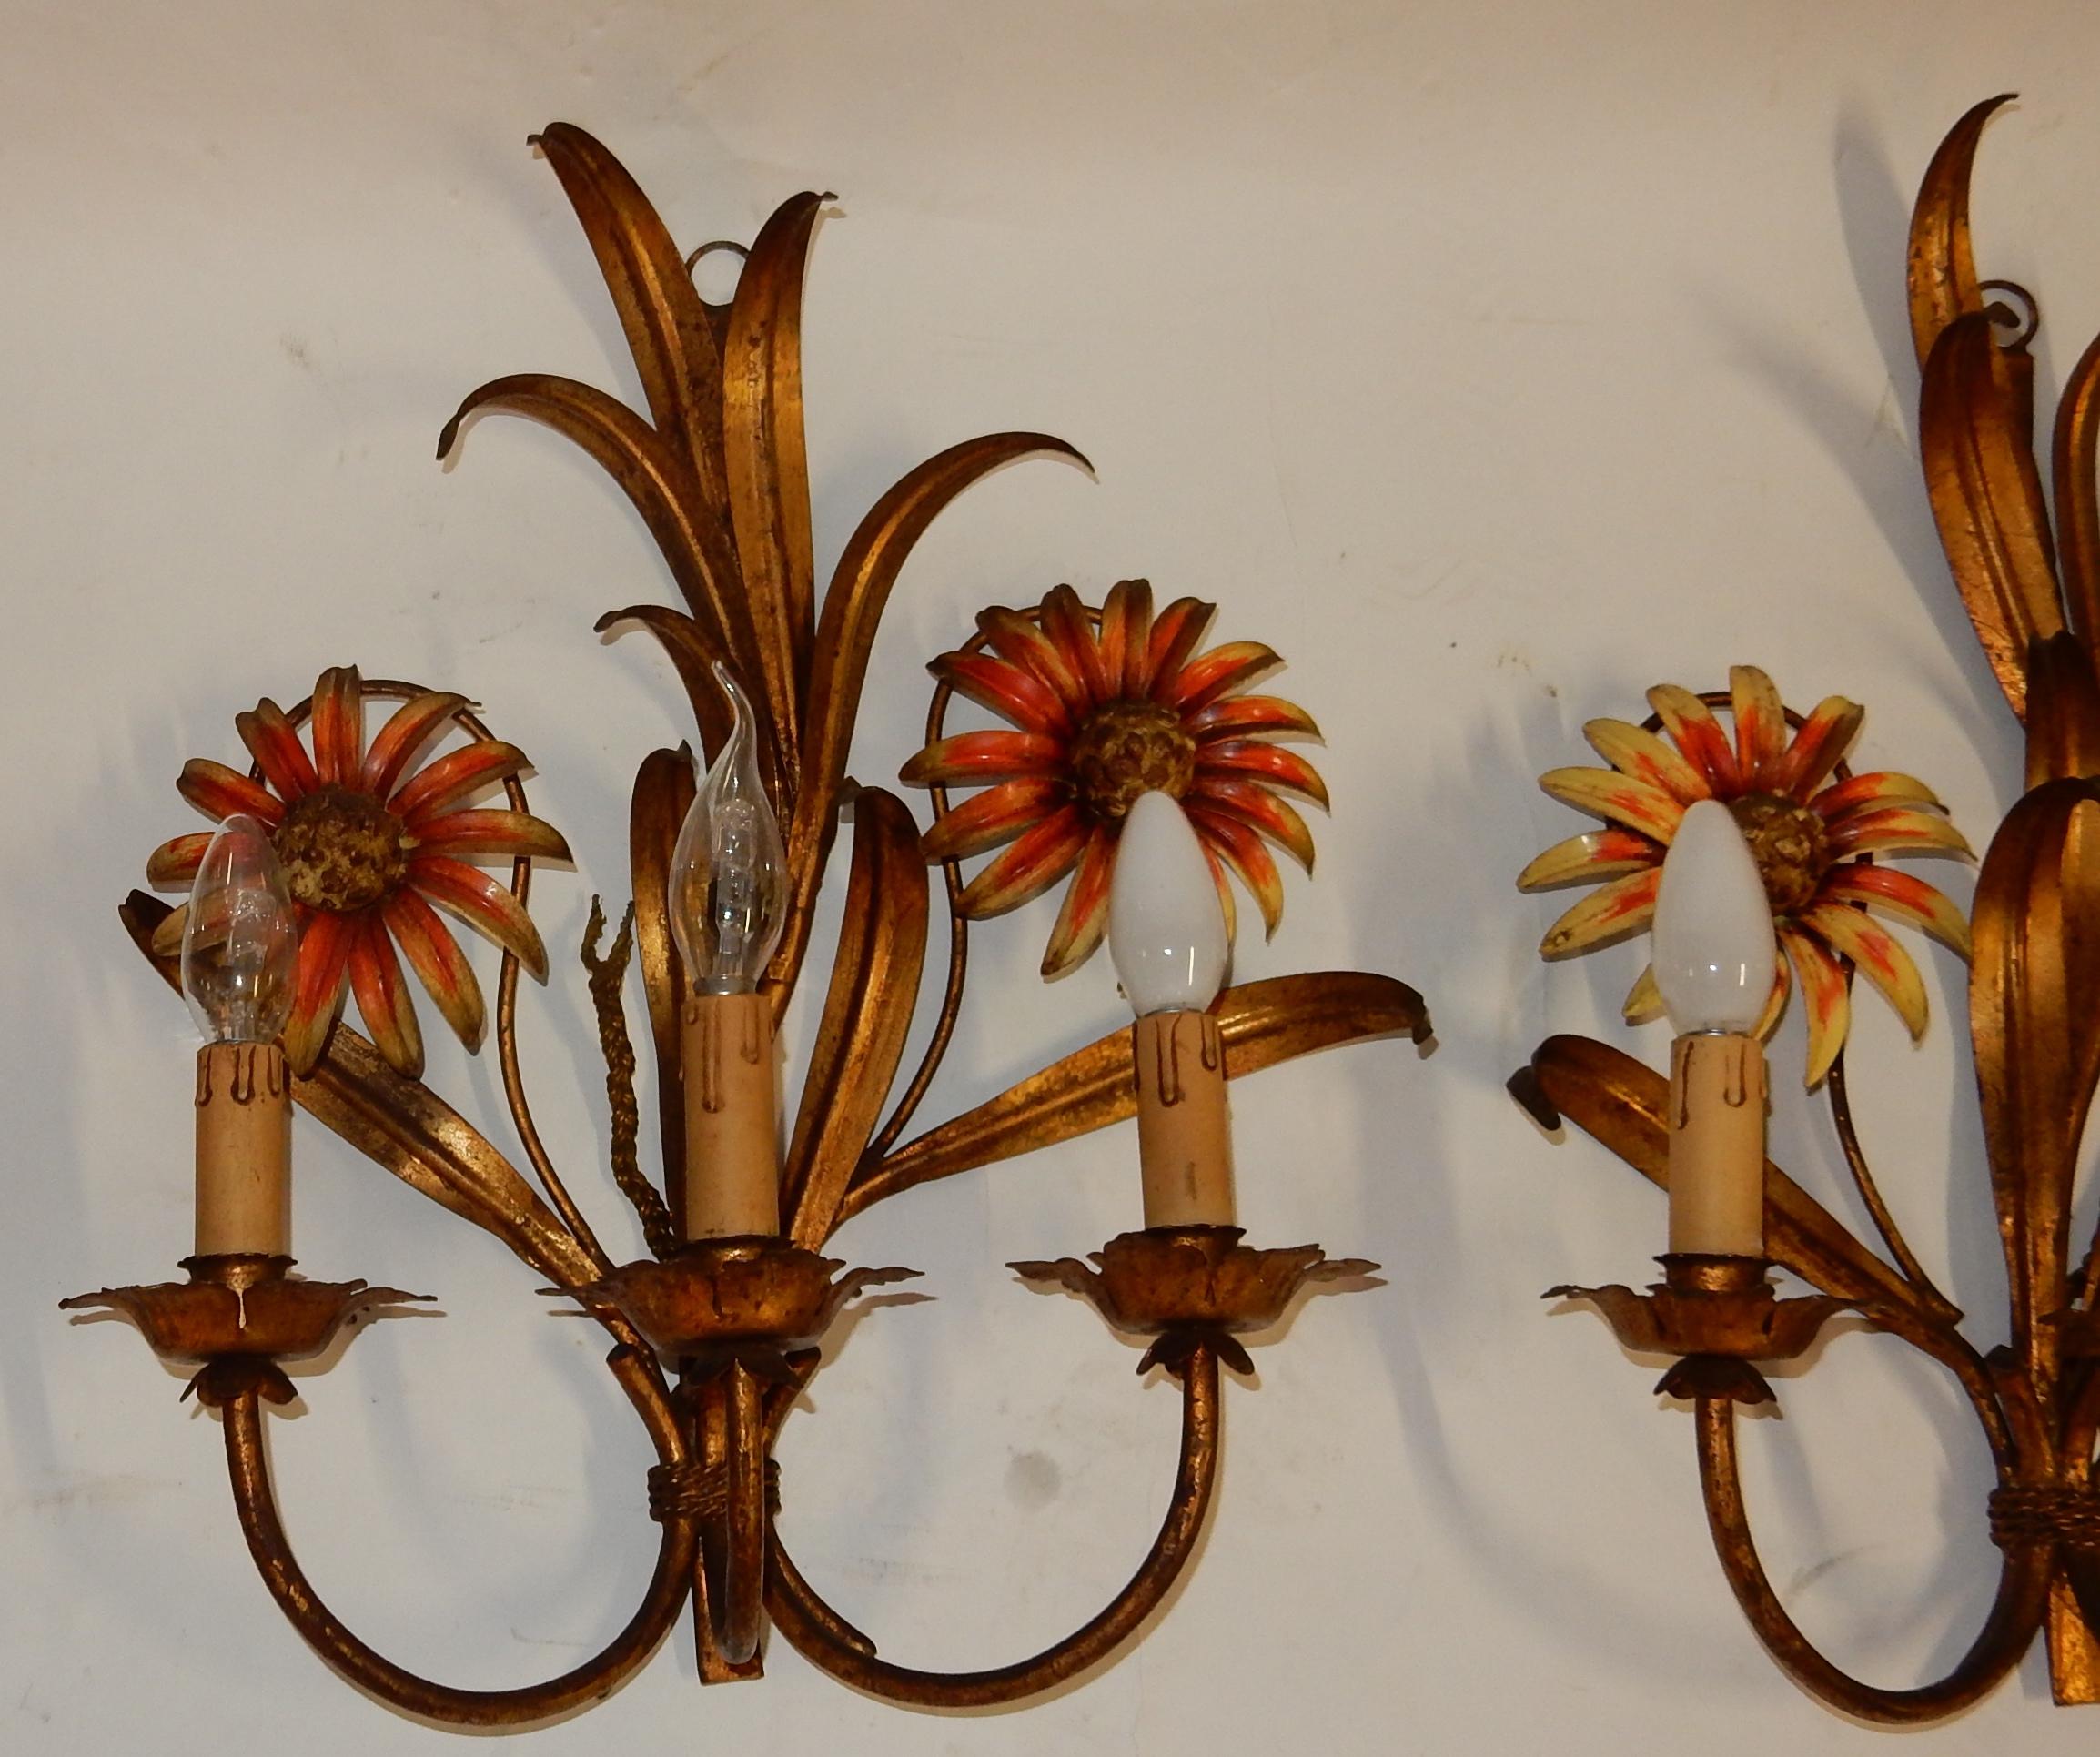 1970 Pair of Painted Metal Sconces with Sunflower Decor 3 Arms of Light For Sale 2